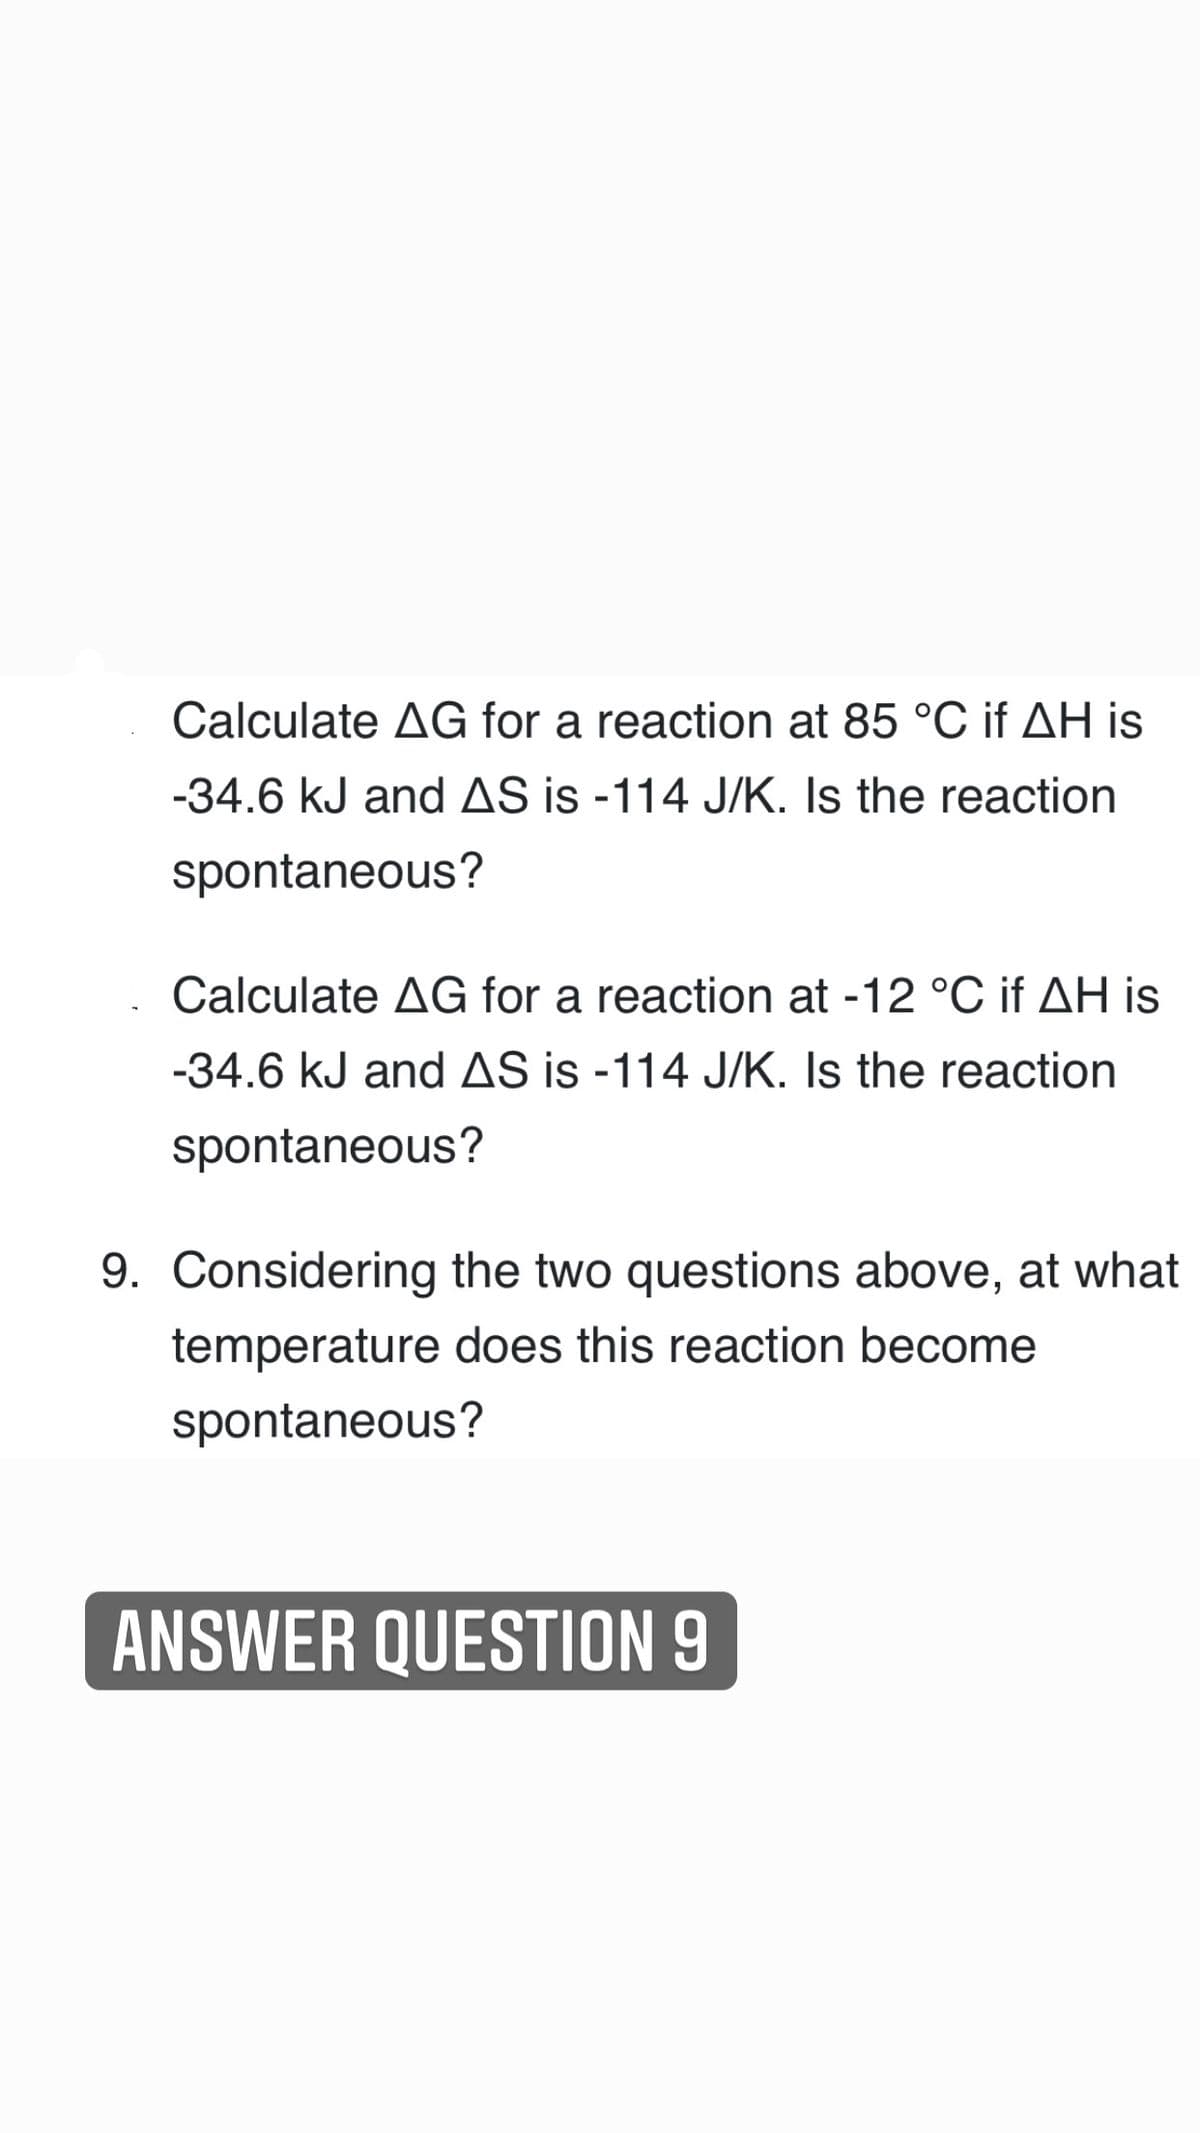 Calculate AG for a reaction at 85 °C if AH is
-34.6 kJ and AS is -114 J/K. Is the reaction
spontaneous?
Calculate AG for a reaction at -12 °C if AH is
-34.6 kJ and AS is -114 J/K. Is the reaction
spontaneous?
9. Considering the two questions above, at what
temperature does this reaction become
spontaneous?
ANSWER QUESTION 9
